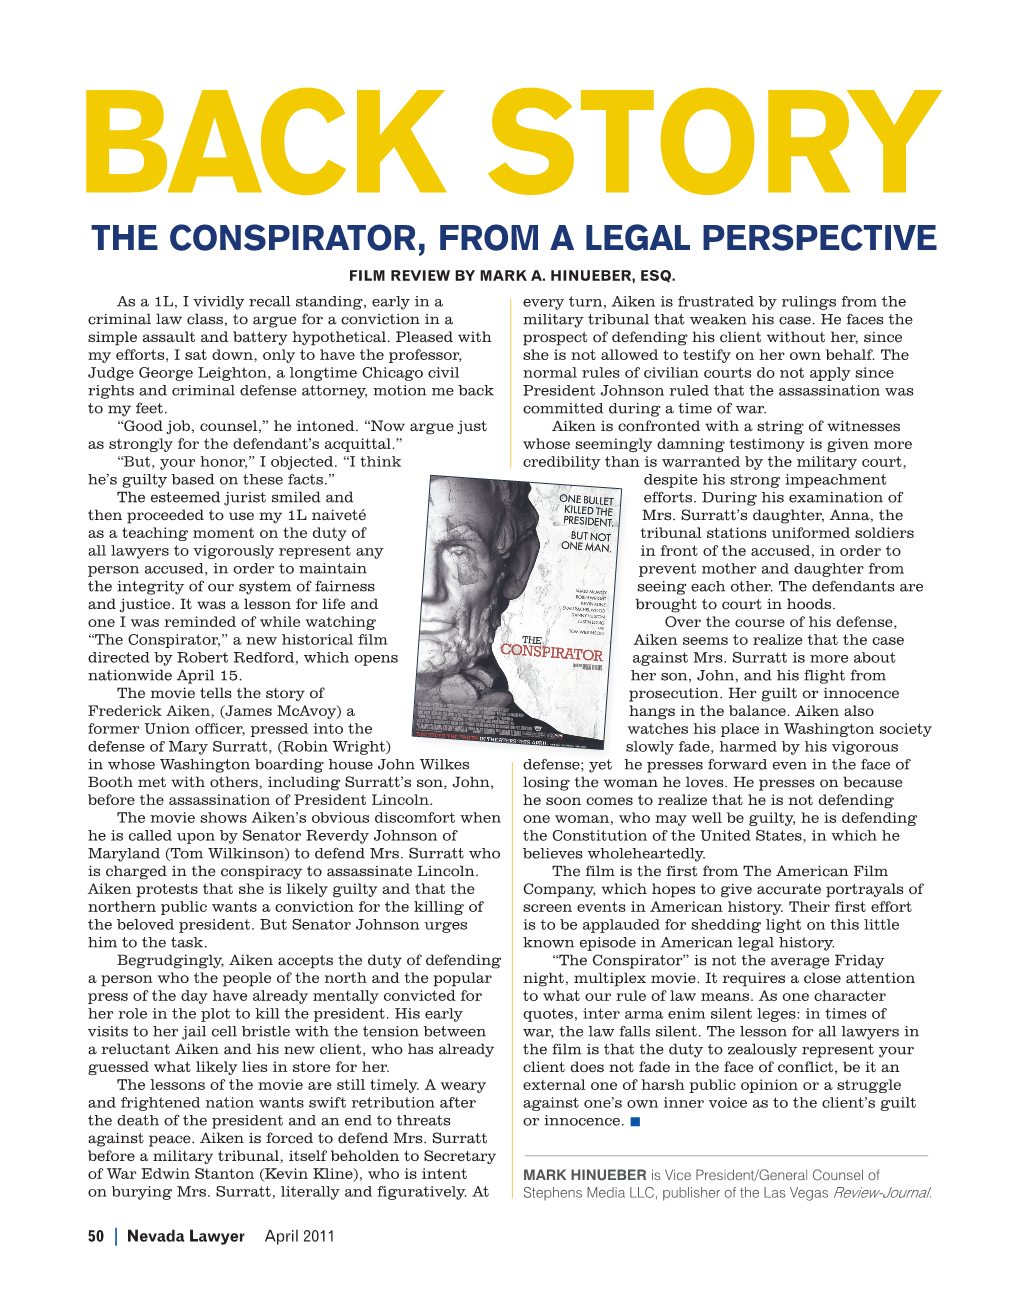 The Conspirator, from a Legal Perspective Film Review by Mark A